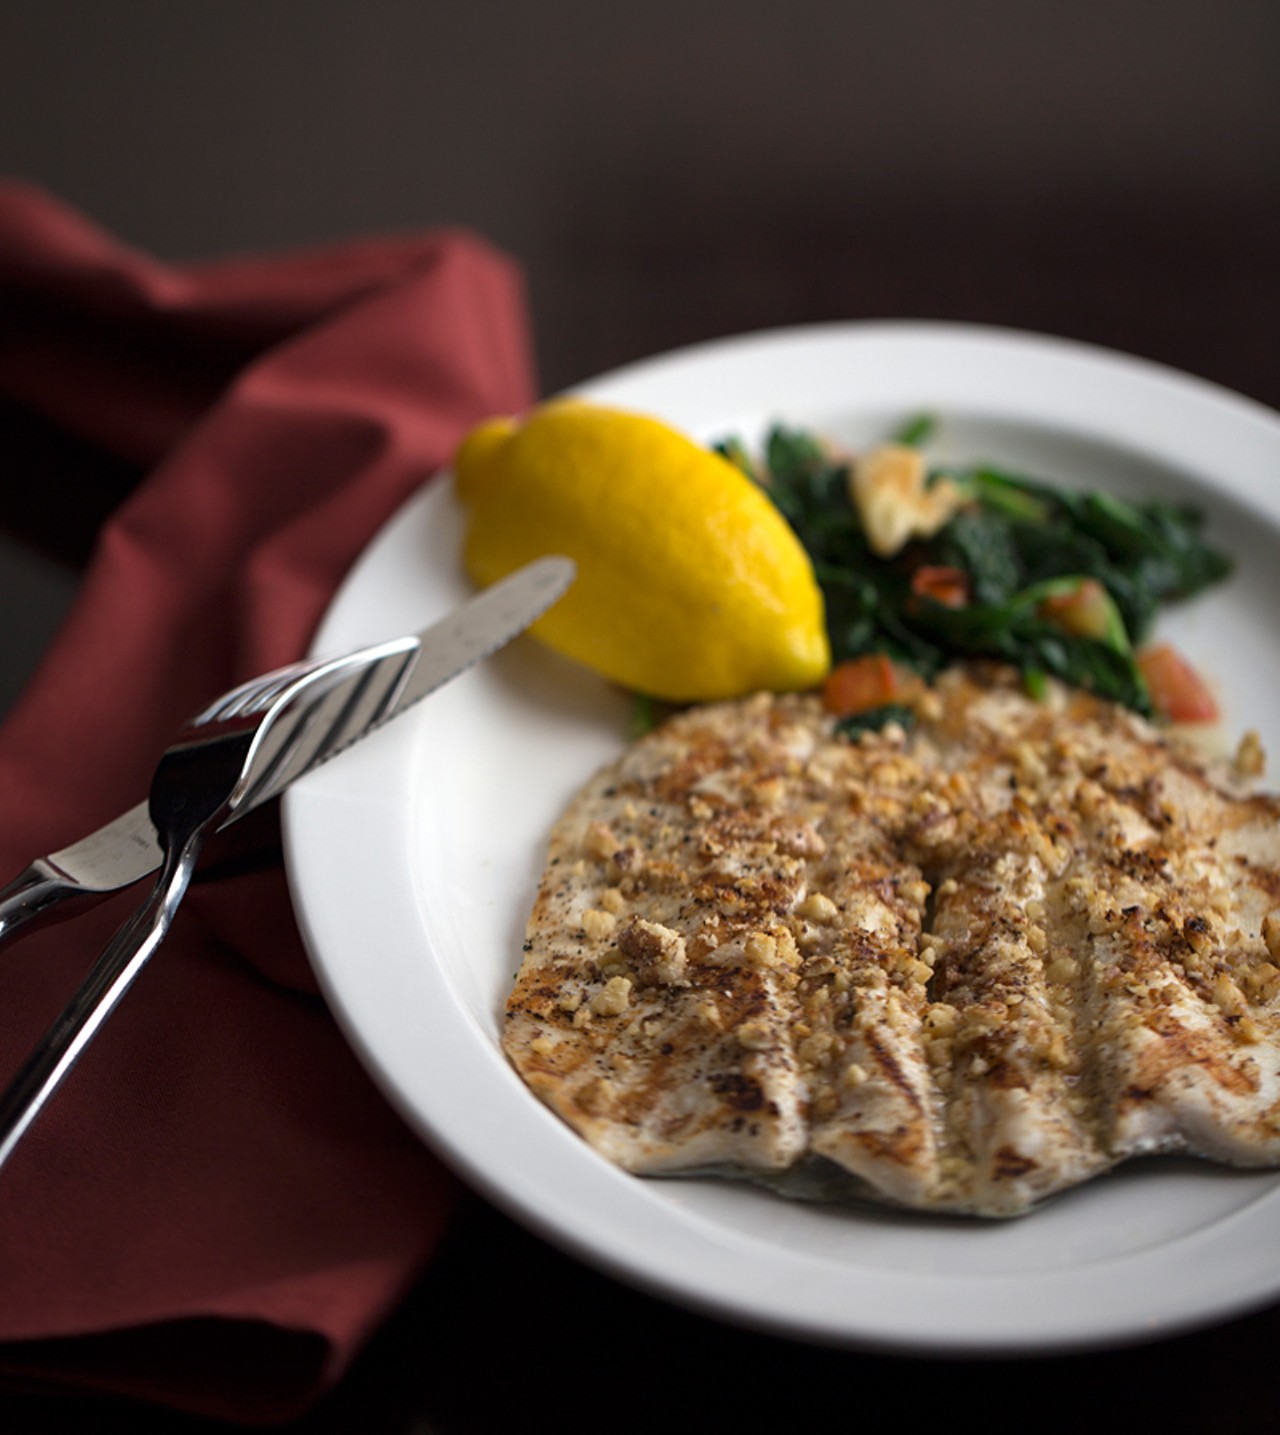 Walnut-encrusted trout with lemon butter and spinach.